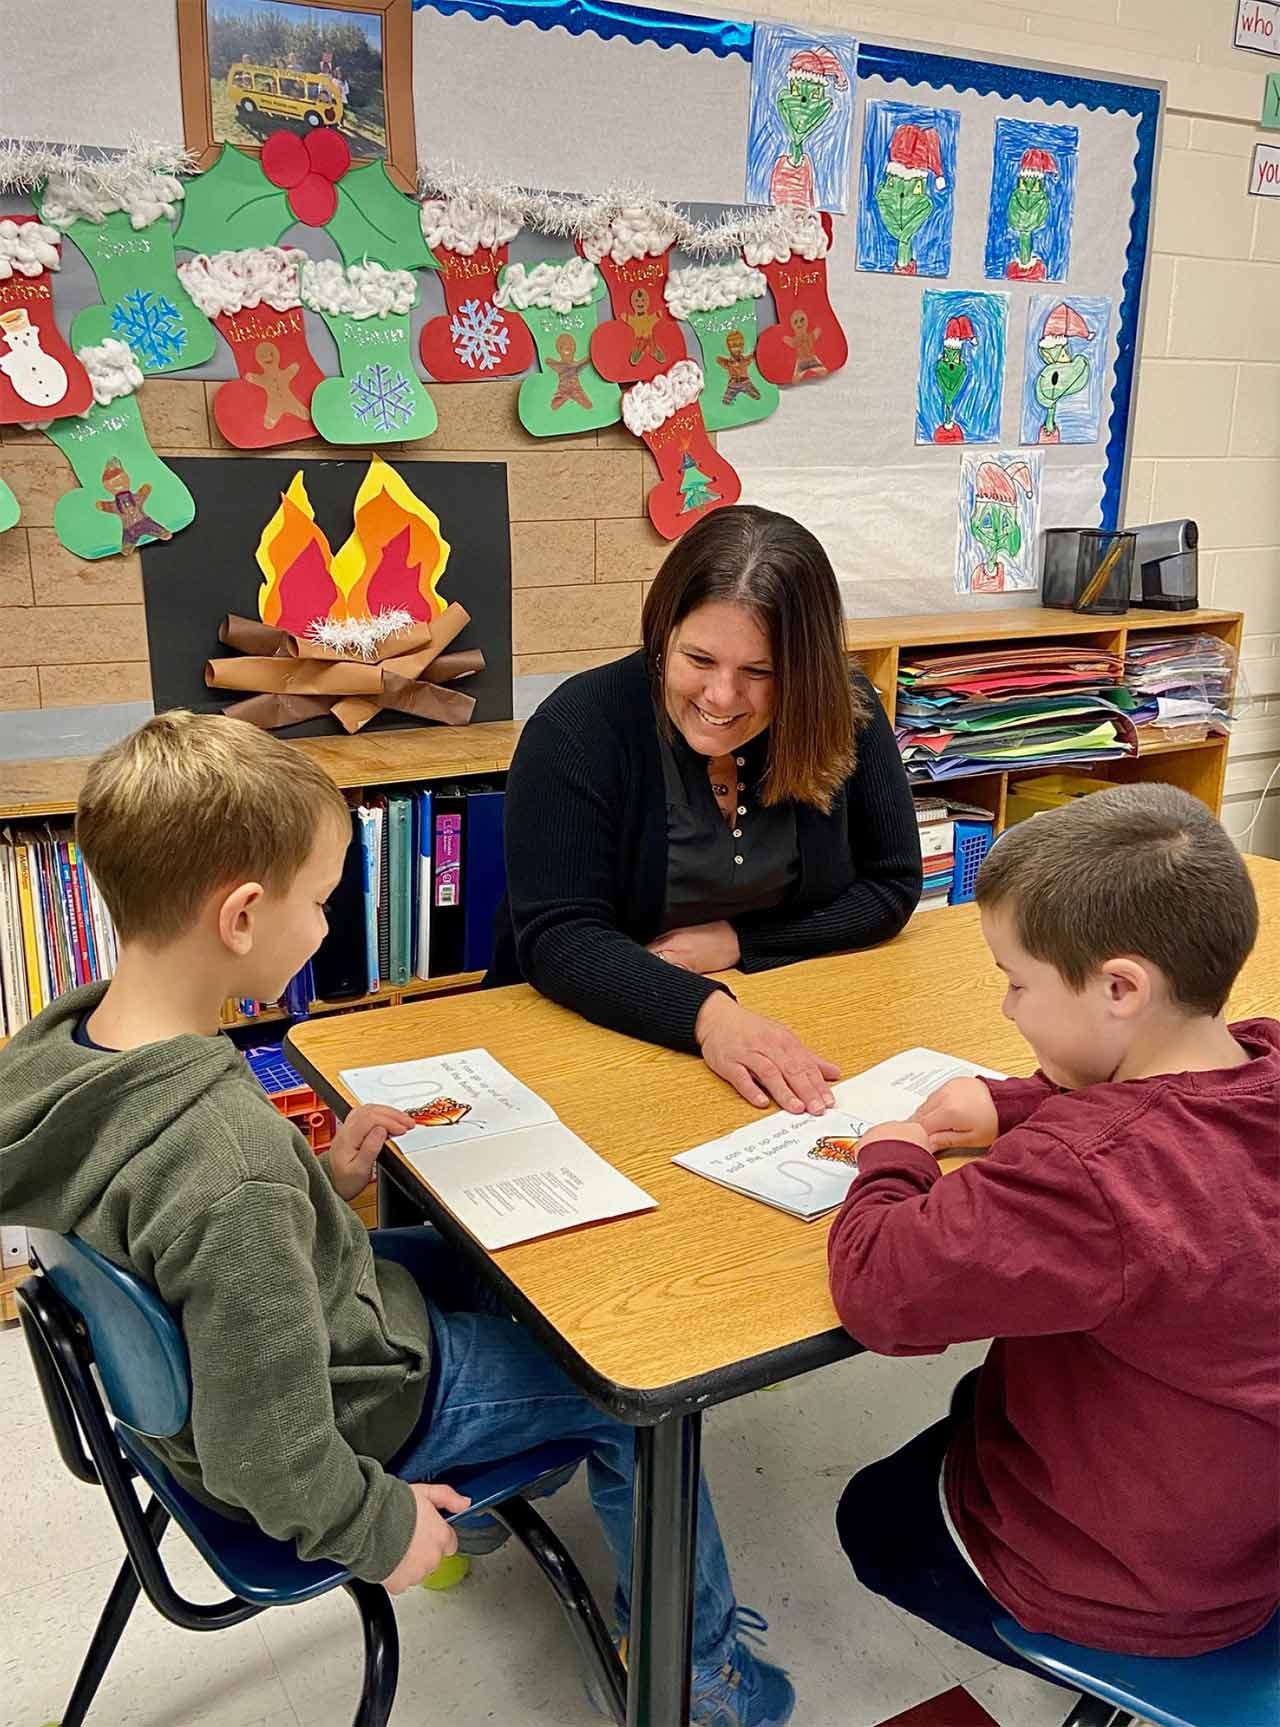 A portrait photograph of Laura Rosner in a black jacket (who is a member of the East Hampton Teachers Association and a co-teacher in an integrated first grade classroom) smiling and sitting with her two students (one wearing a green jacket and the other a red sweatshirt) discussing classwork